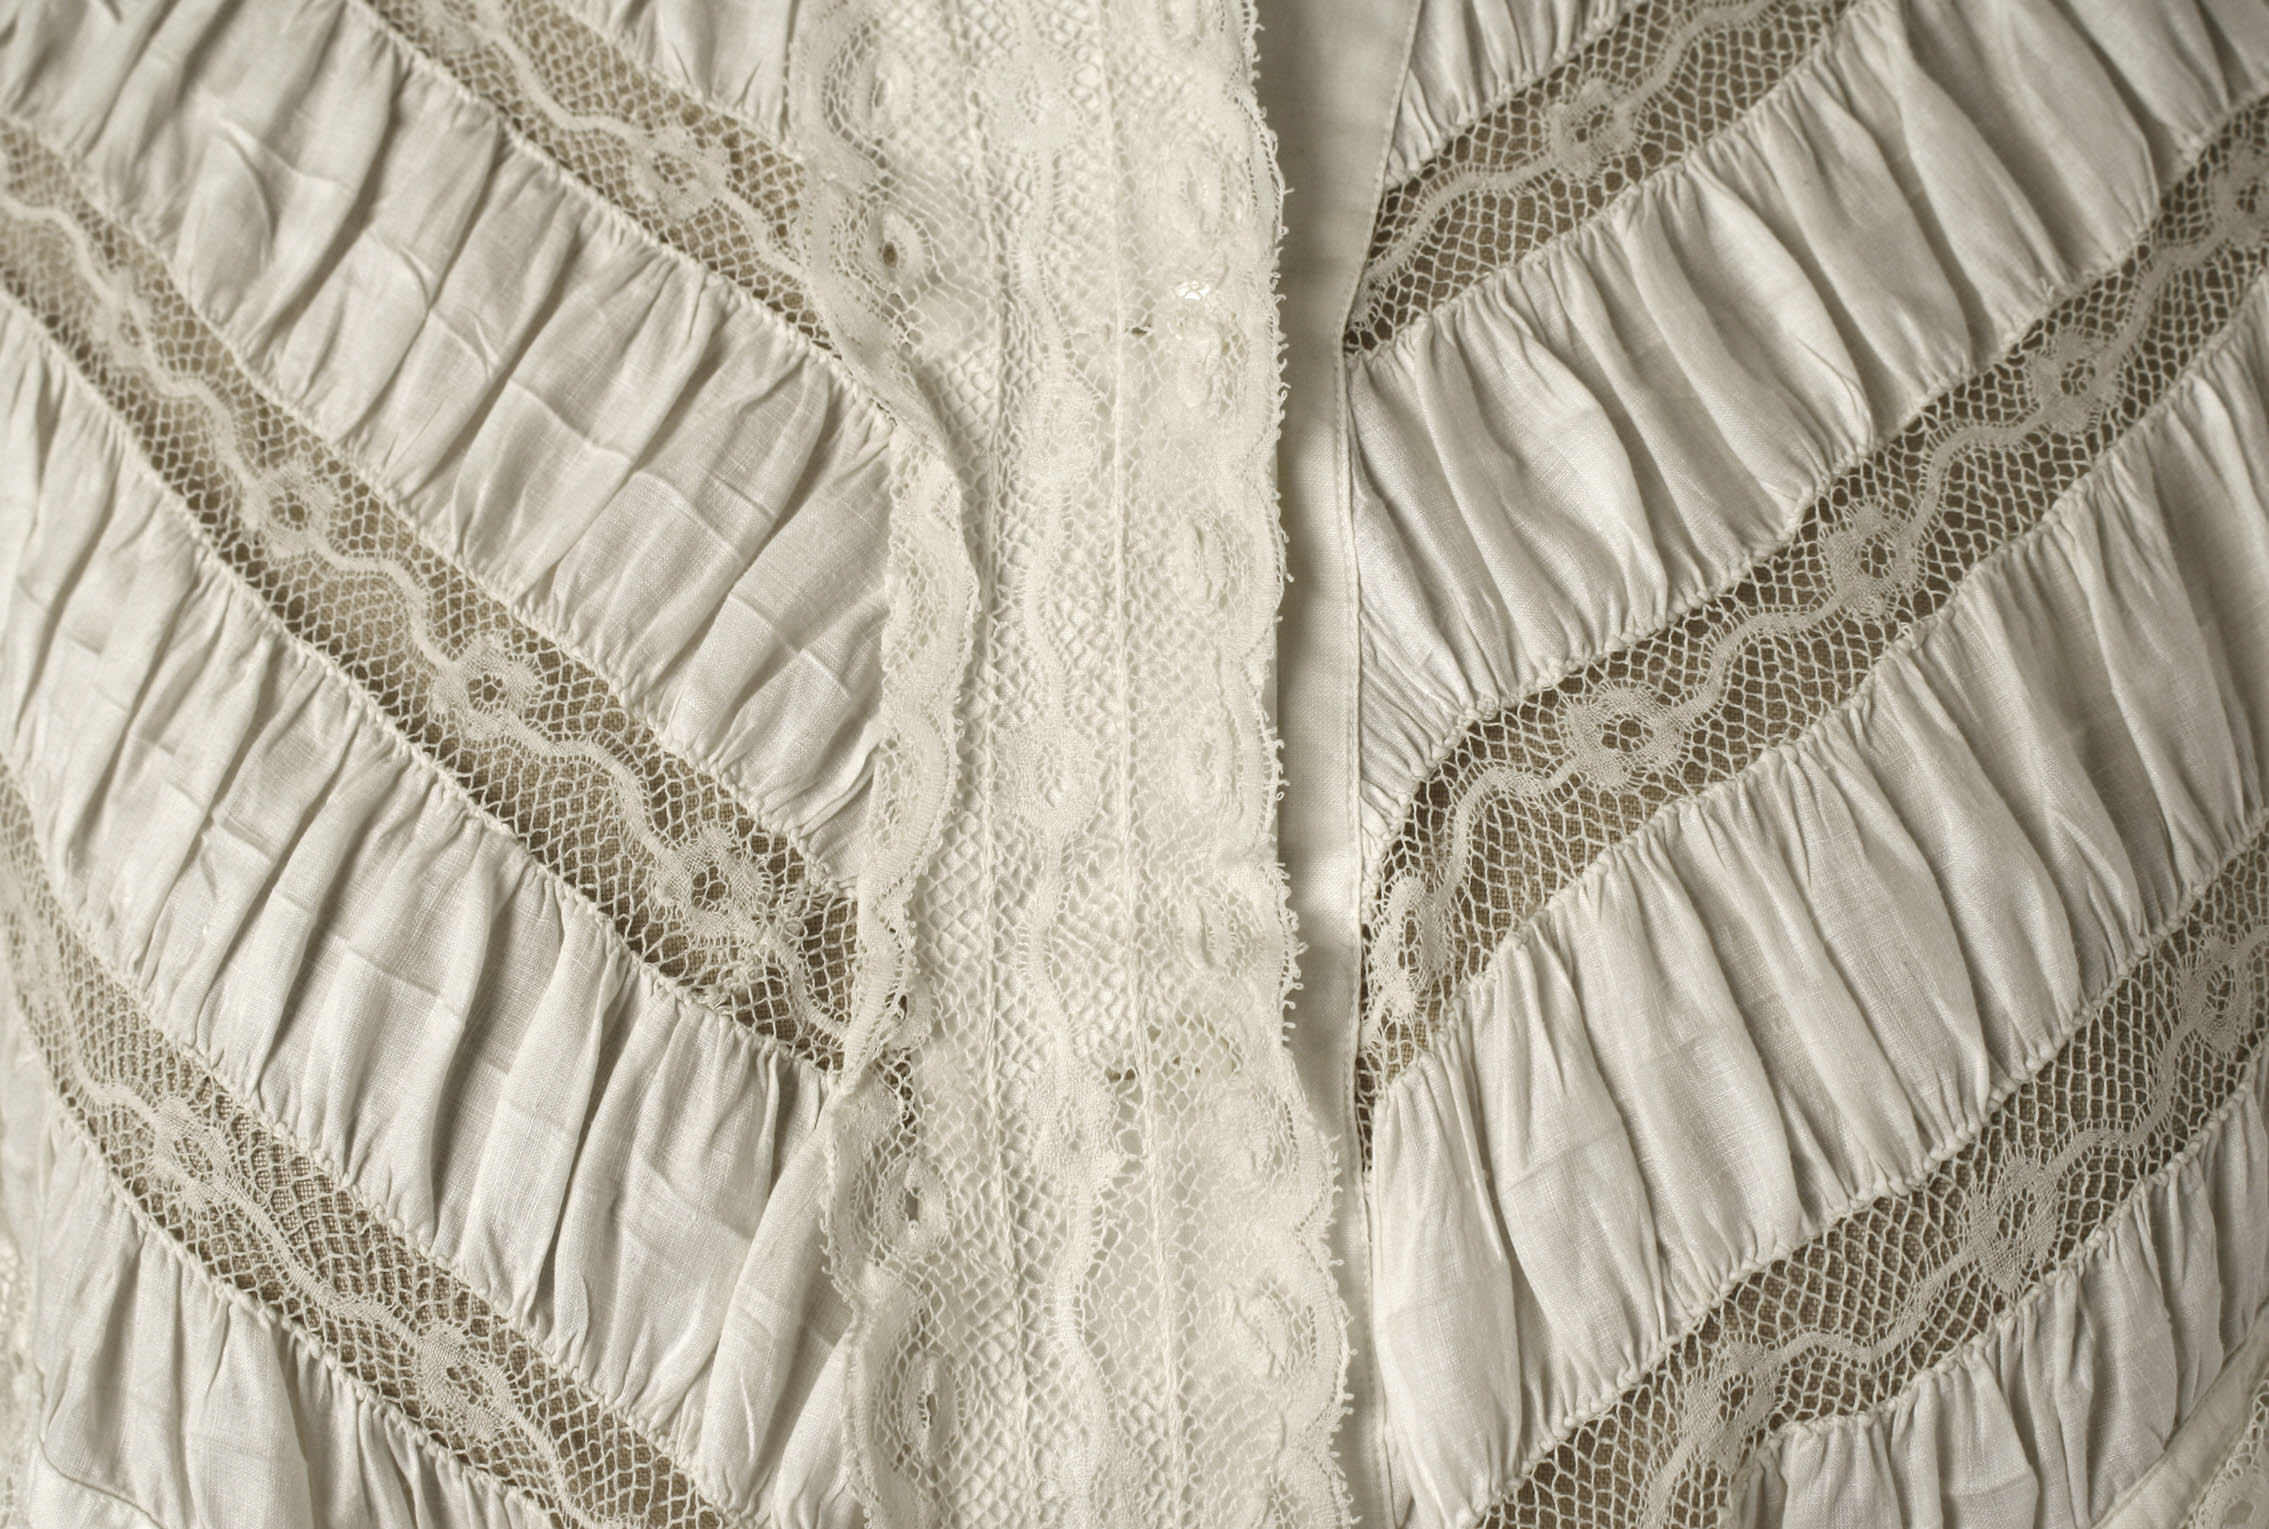 Nightgown | probably American | The Metropolitan Museum of Art